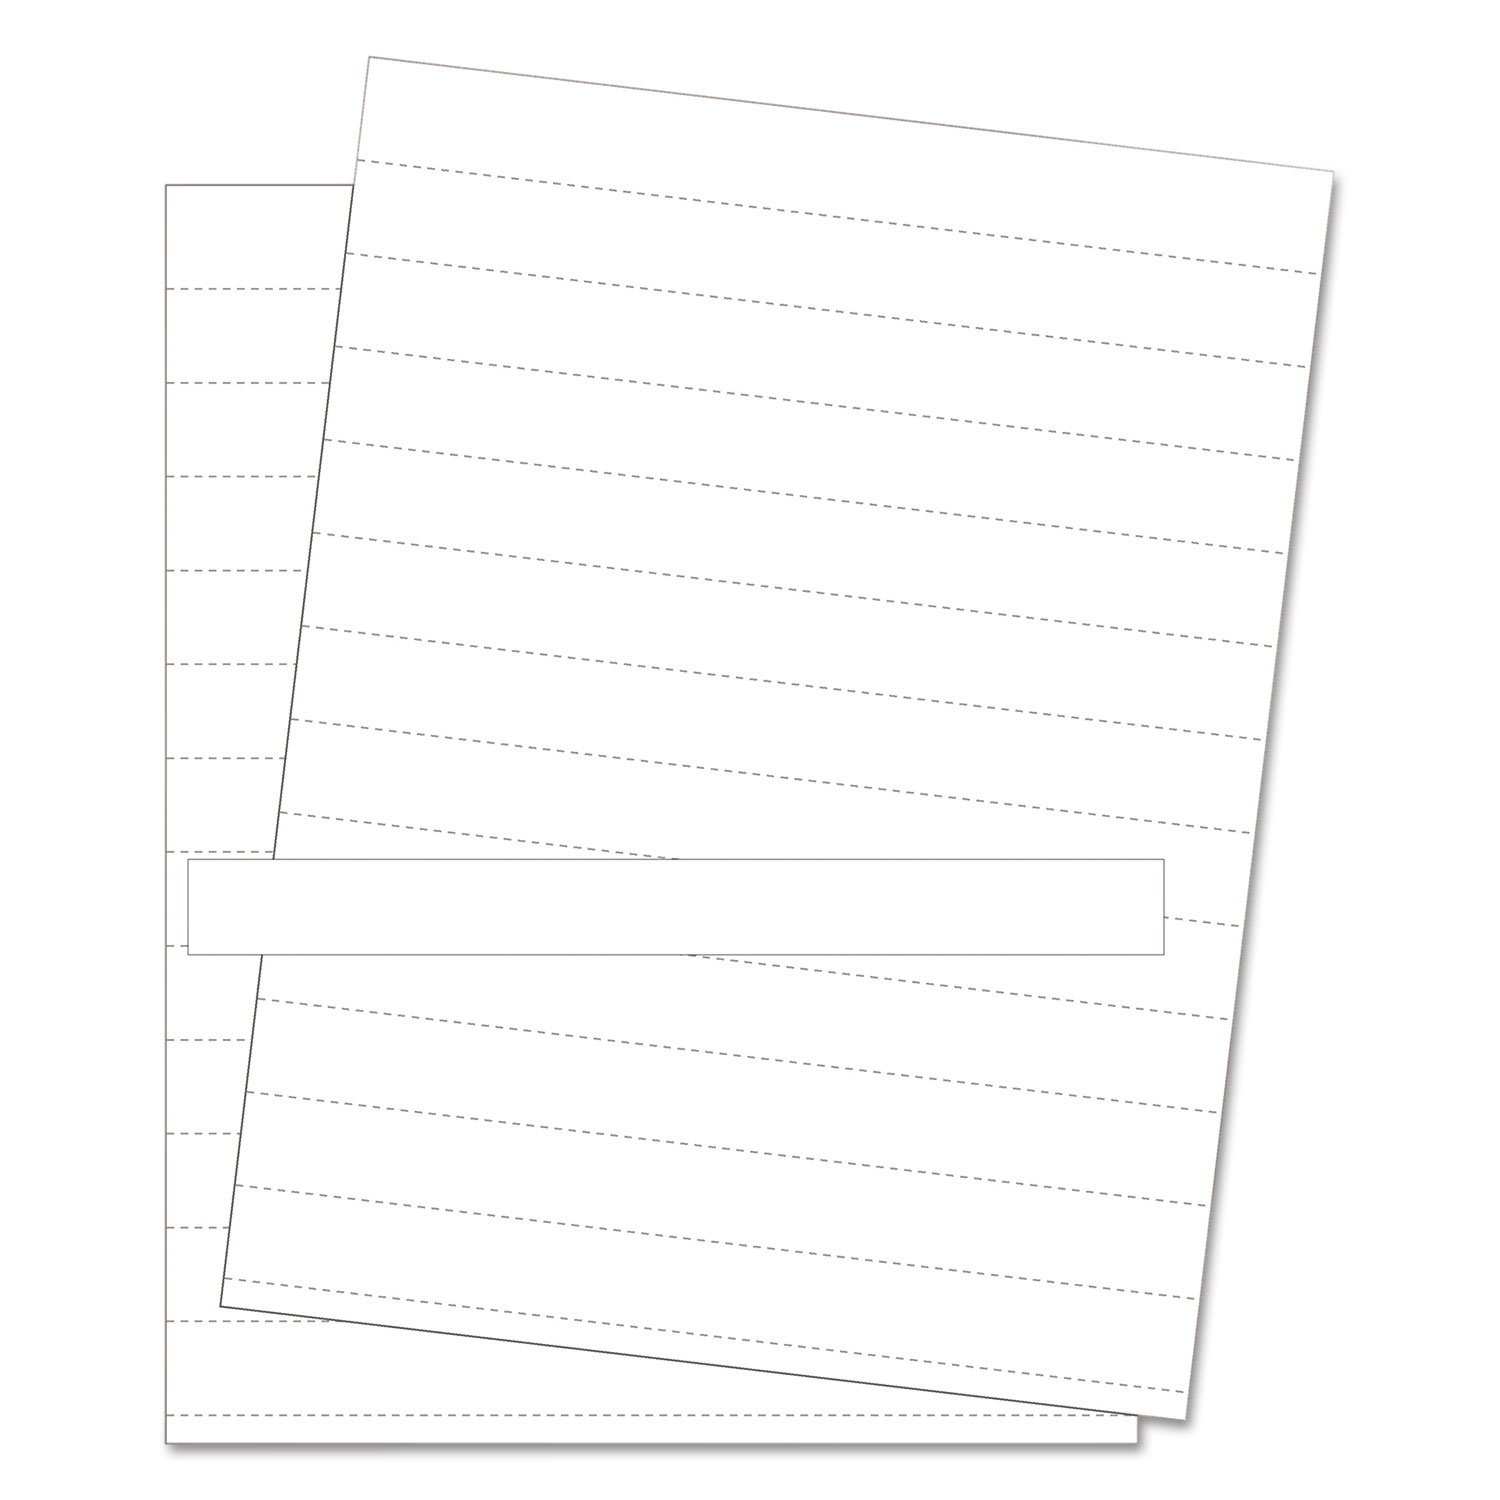  MasterVision FM1615 Data Card Replacement Sheet, 8 1/2 x 11 Sheets, White, 10/PK (BVCFM1615) 